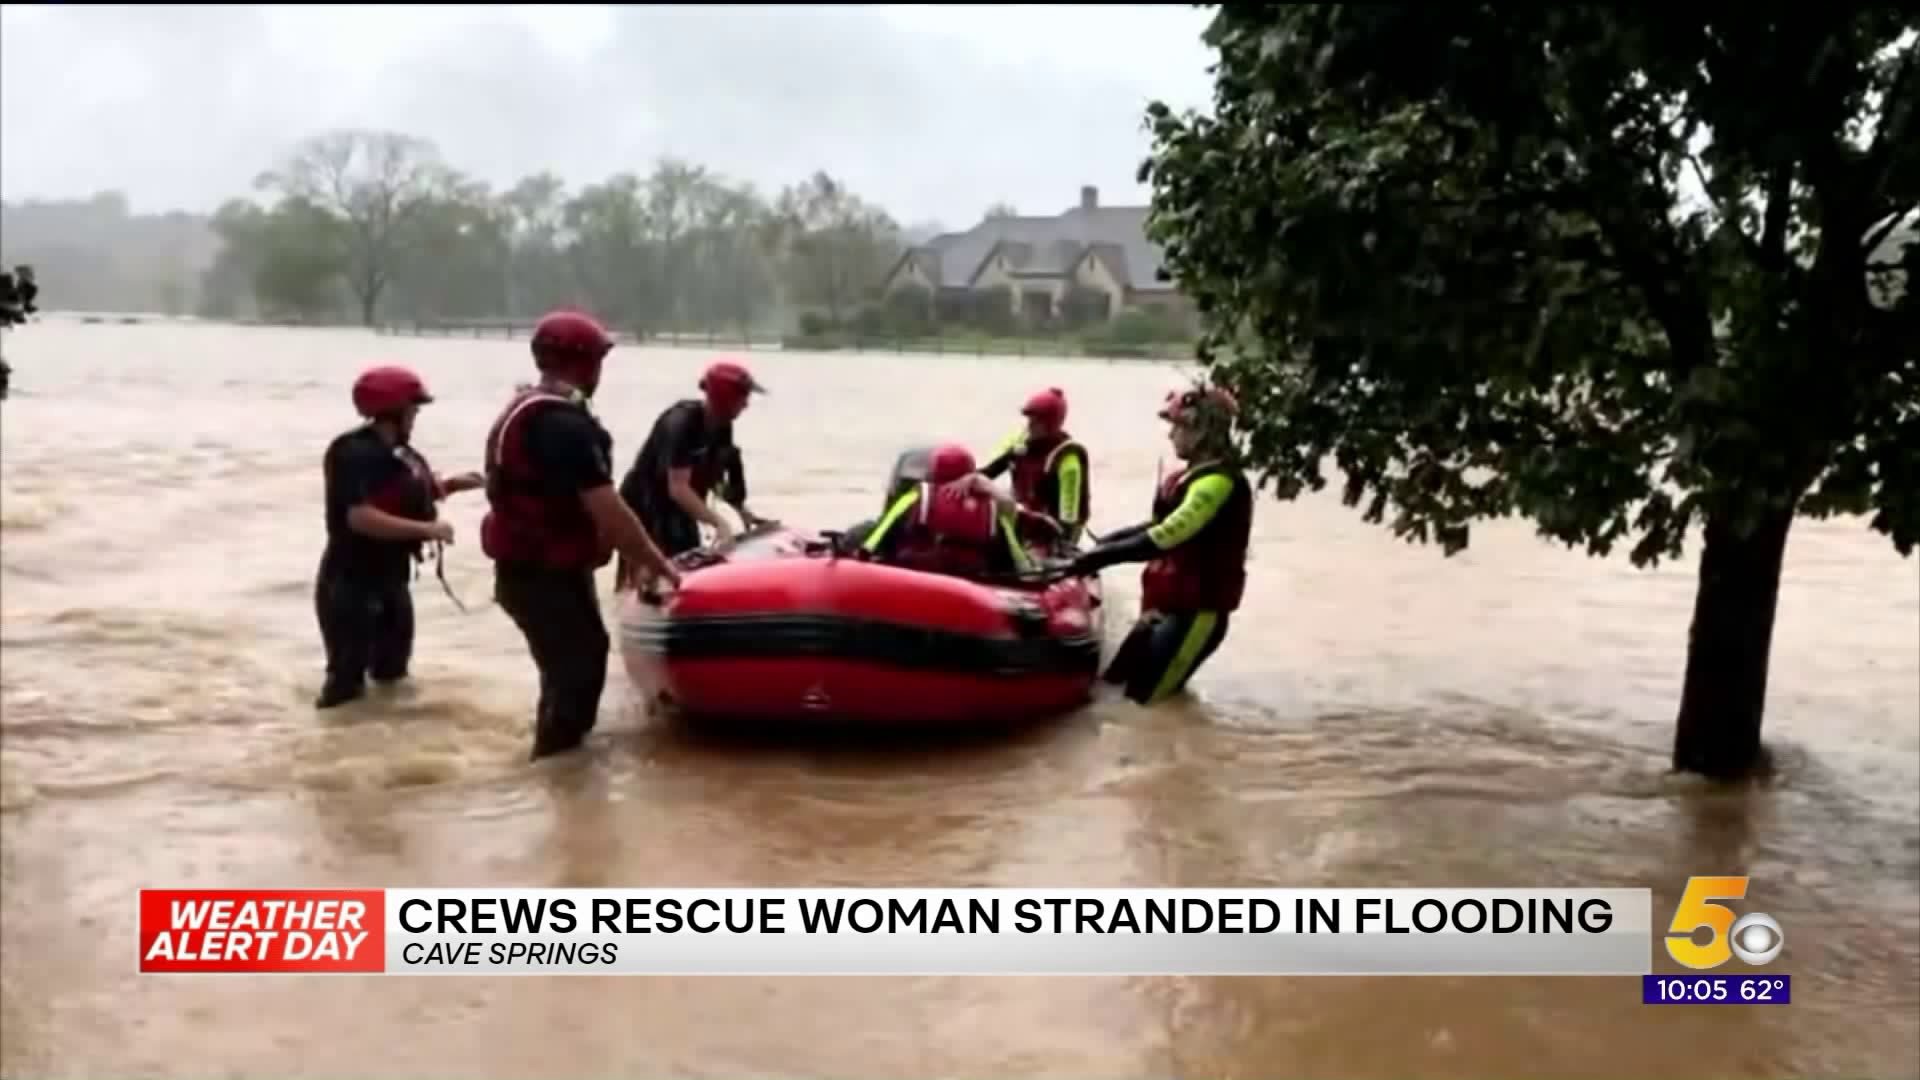 Crews Rescue Woman Stranded In Flooding